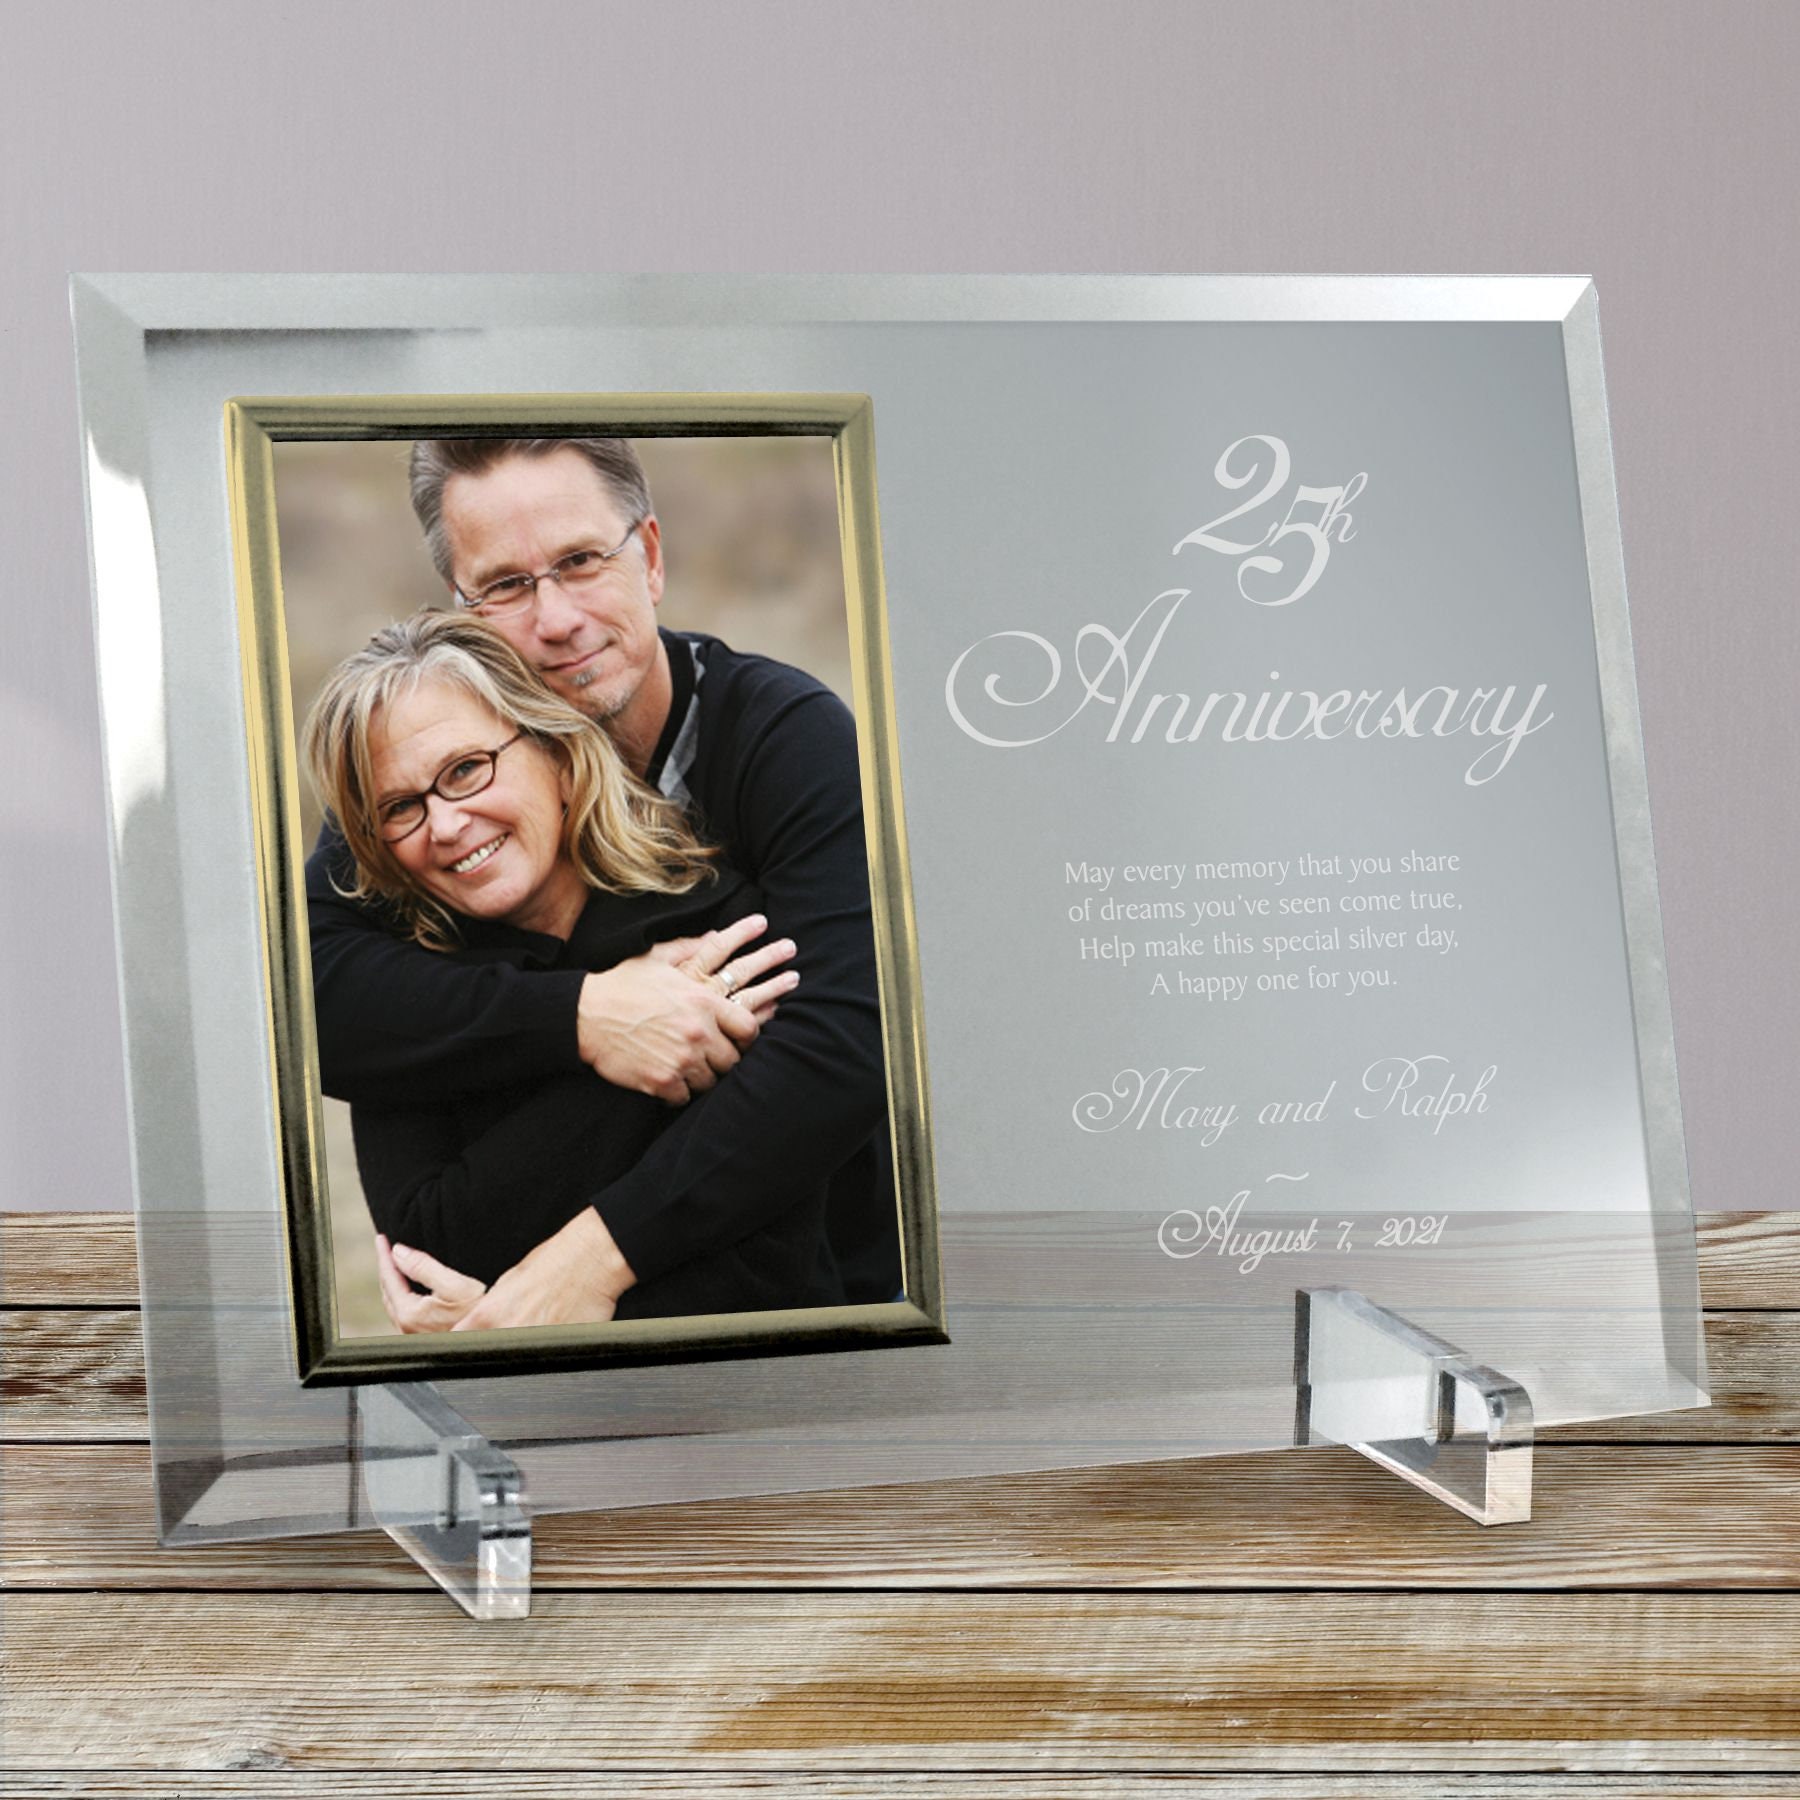 25th Anniversary Glass Picture Frame, Glass Picture Frame for Married  Couples, Memorable Anniversary Gift pgsg92906-25x 